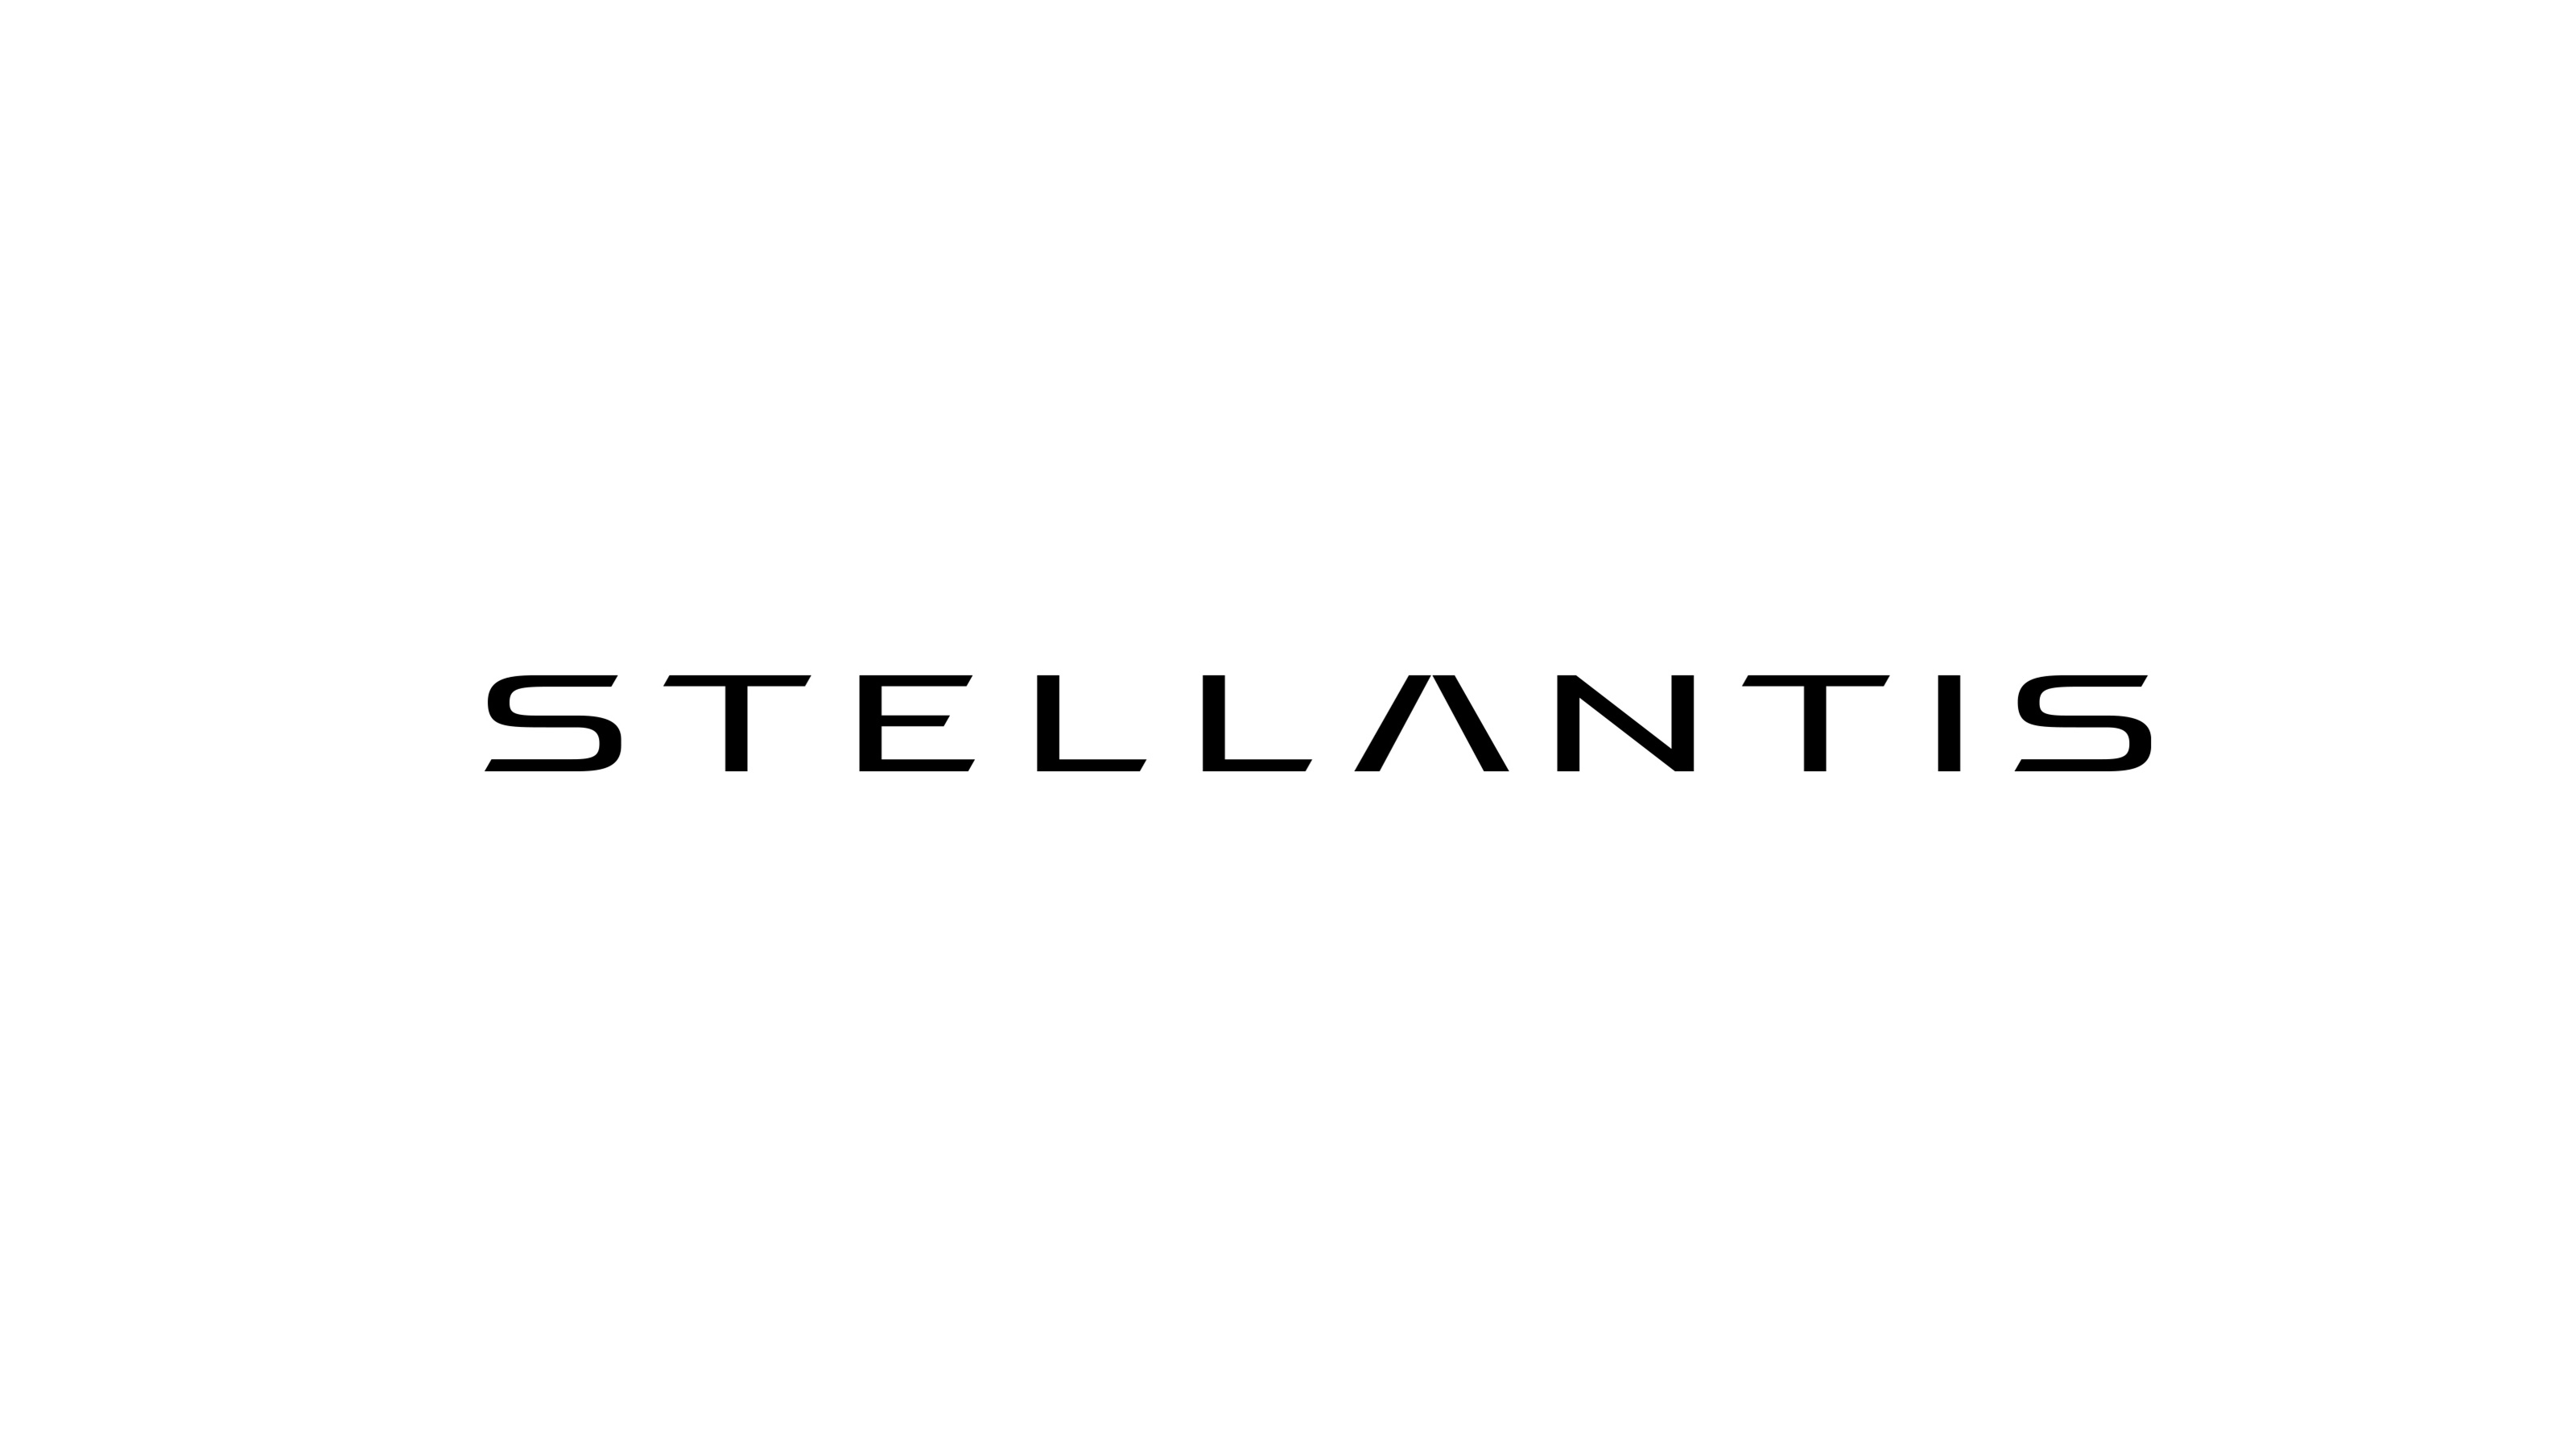 Stellantis: the new name for FCA and PSA post merger 